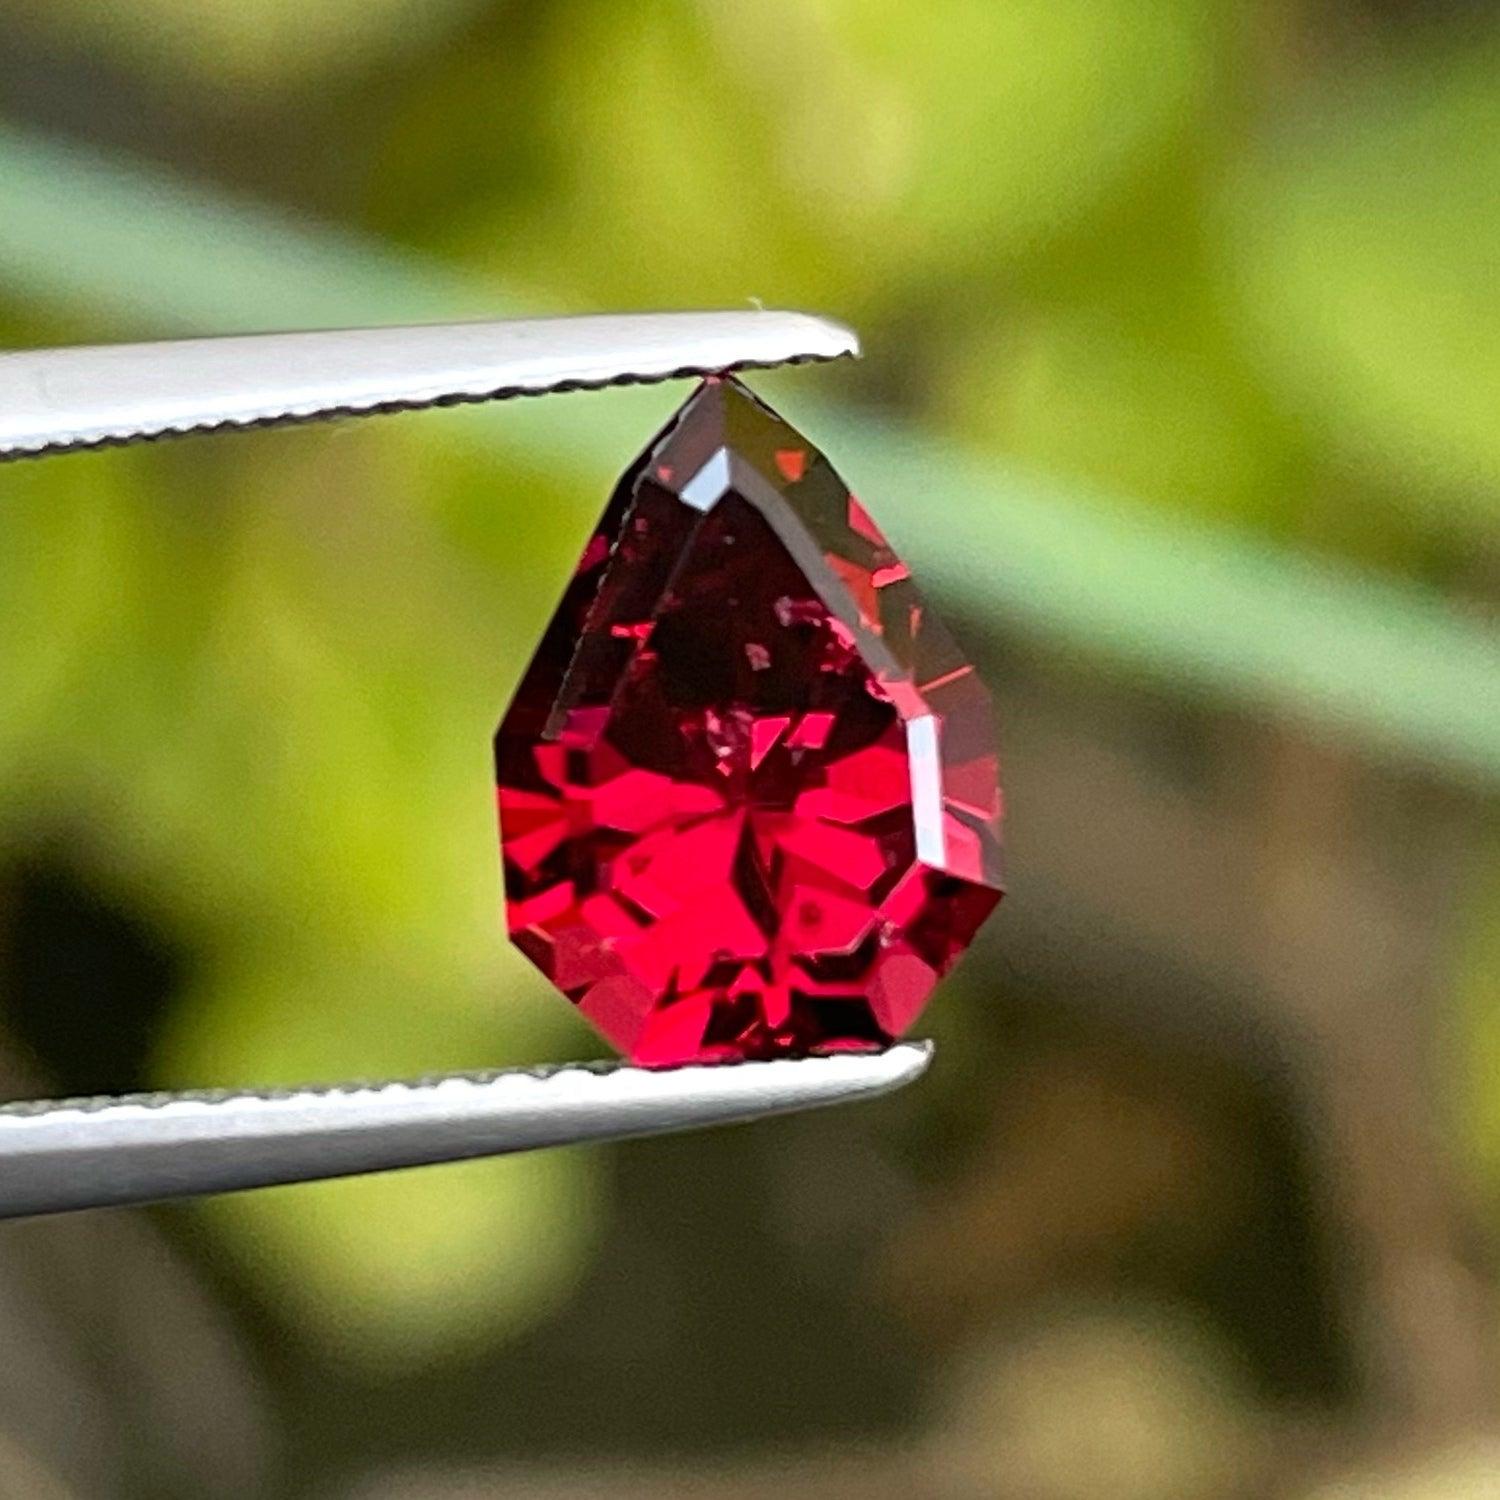 Bright Red Garnet Loose Gemstone, available for sale at wholesale price natural high quality, 2.95 carats loose garnet gemstone from Africa.

Product Information:
GEMSTONE TYPE:	Bright Red Garnet Loose Gemstone
WEIGHT:	2.95 carats
DIMENSIONS:	10.0 x